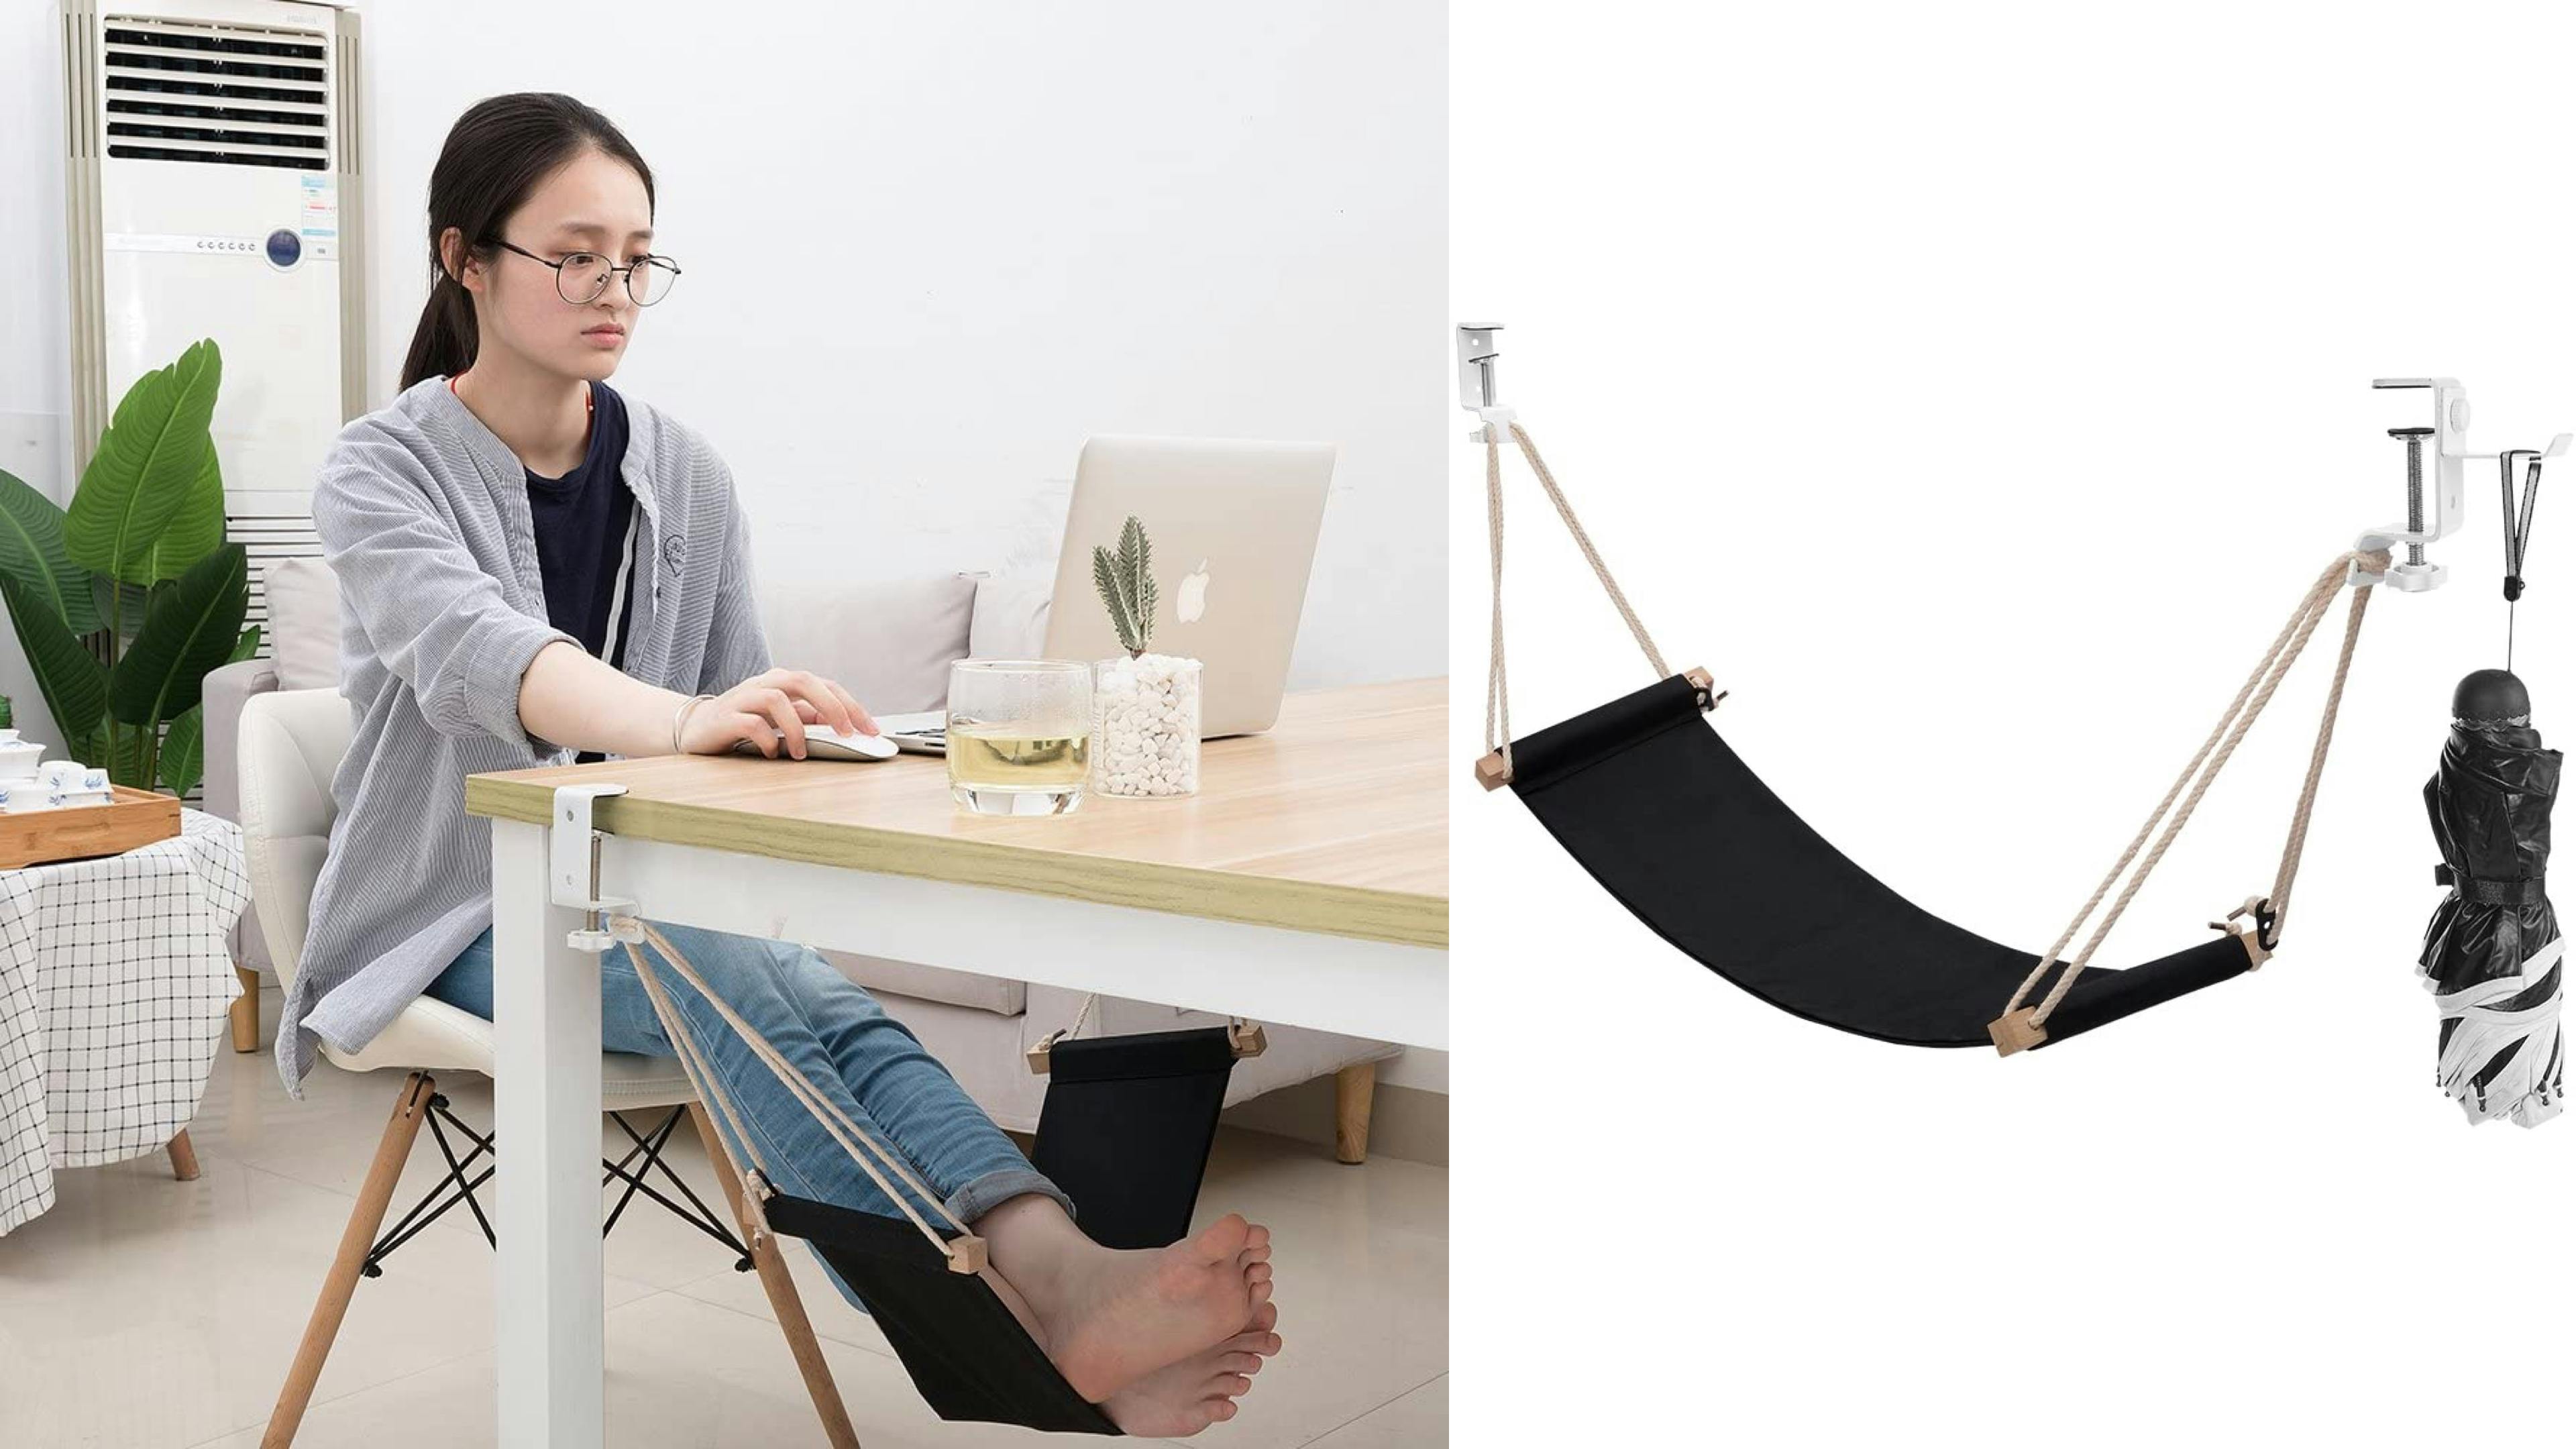 foot hammock for underneath your desk so you can raise your feet